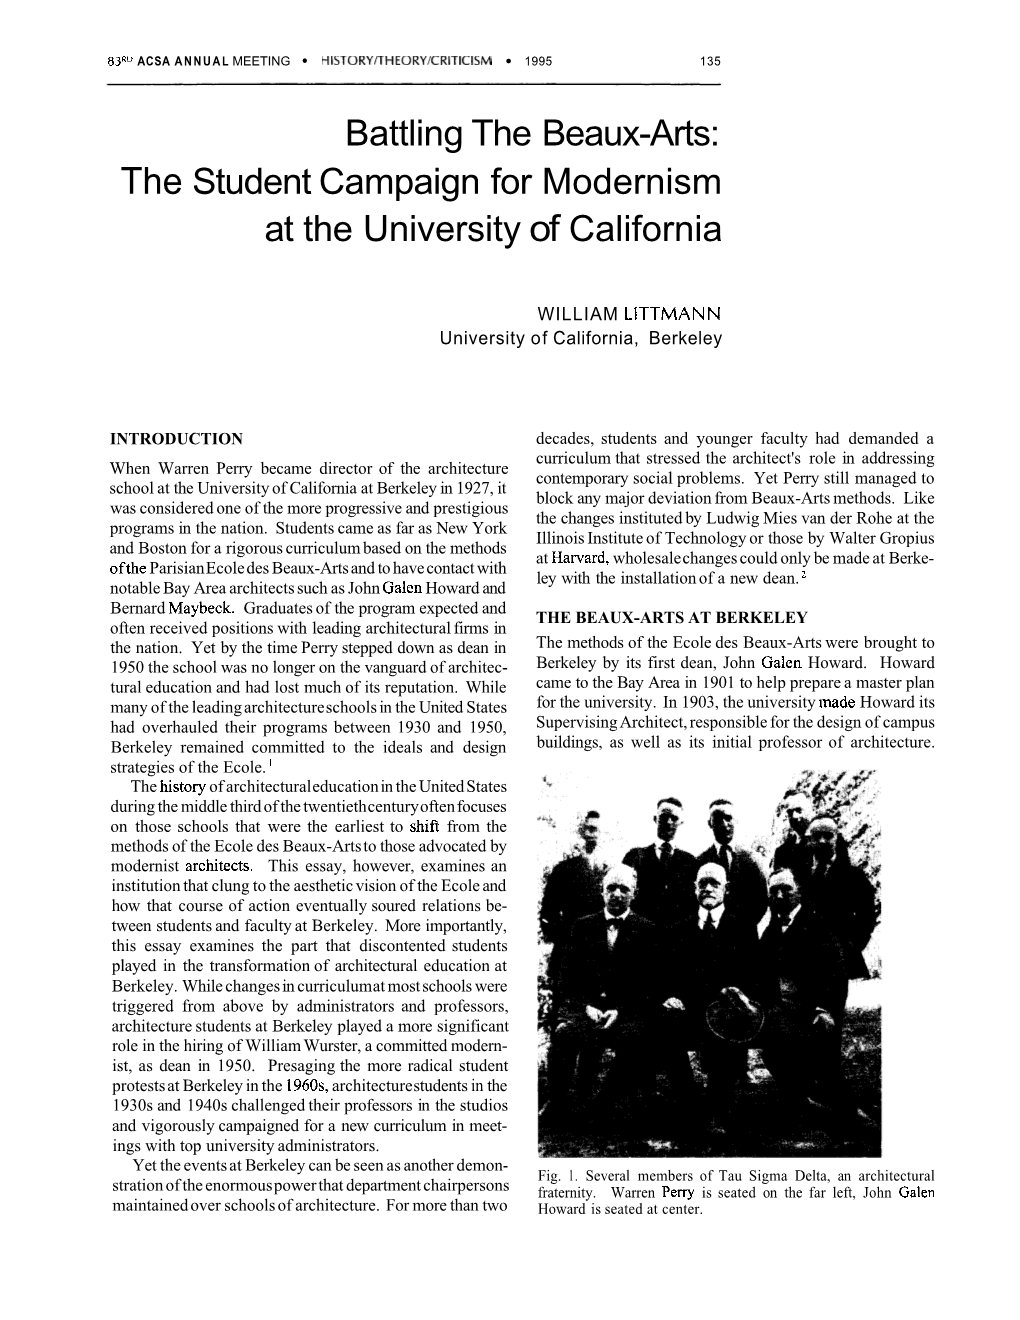 Battling the Beaux-Arts: the Student Campaign for Modernism at the University of California